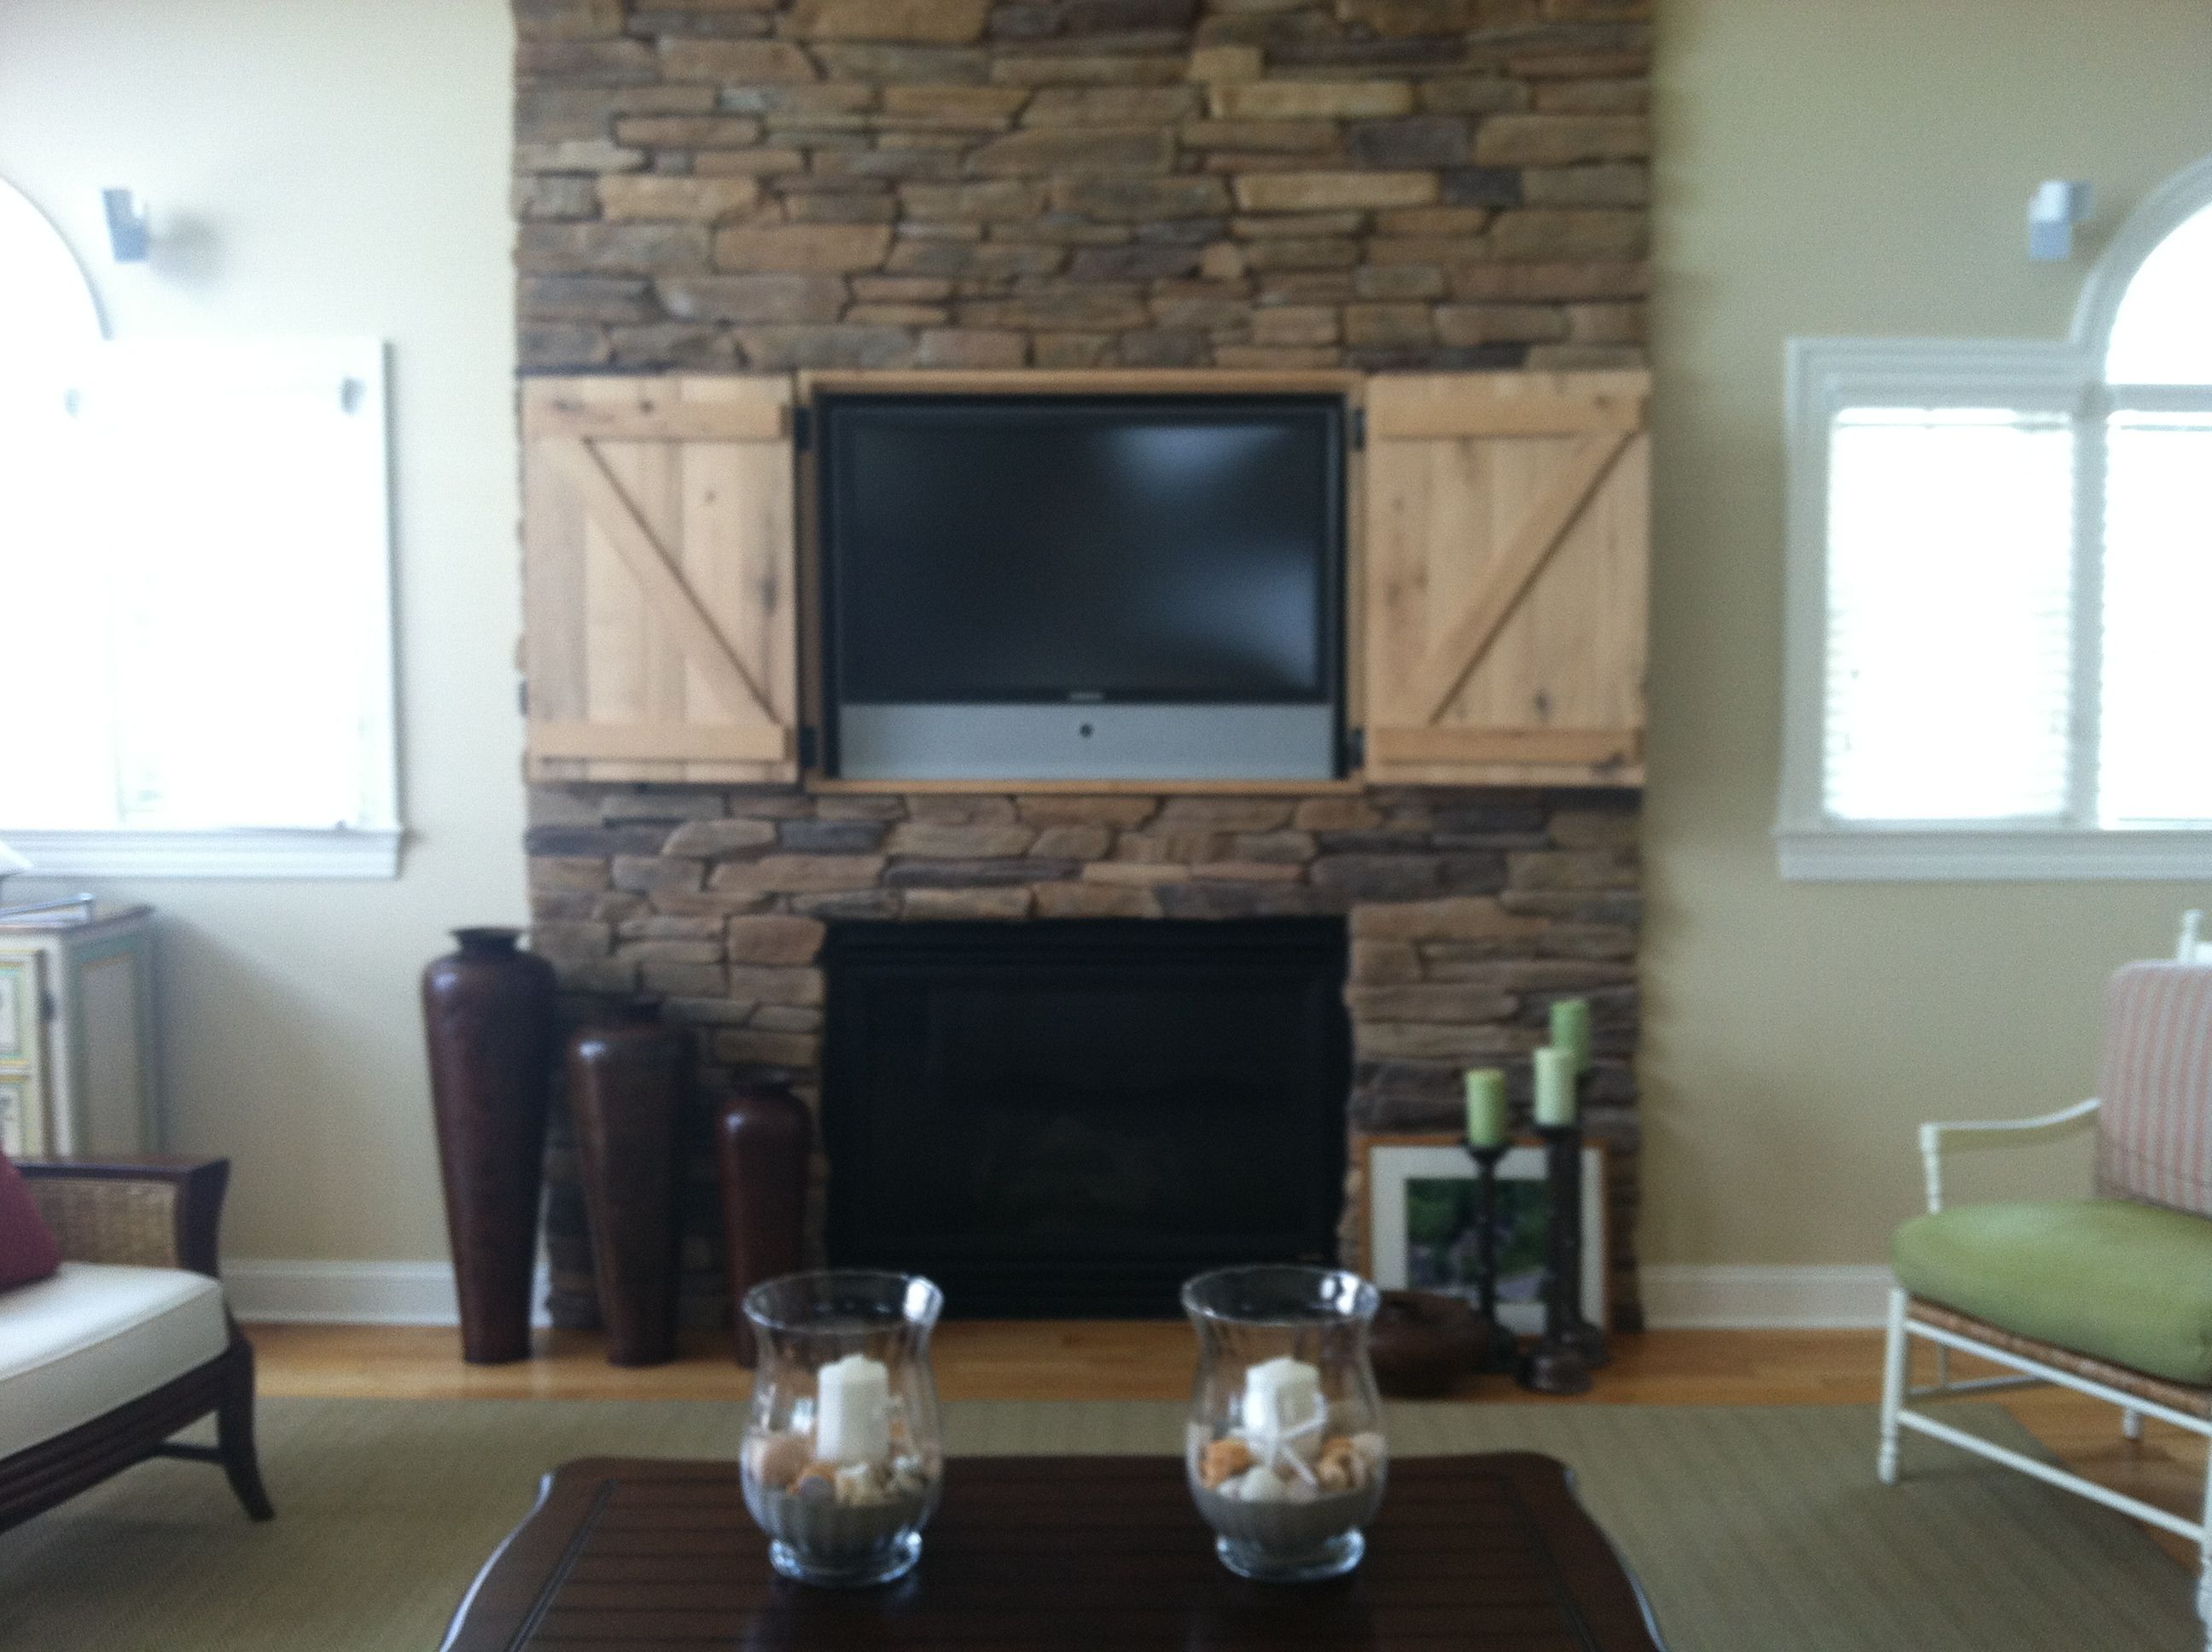 Fireplace Front Ideas Awesome Hidden Tv Over Fireplace Open Doors Decor and Design